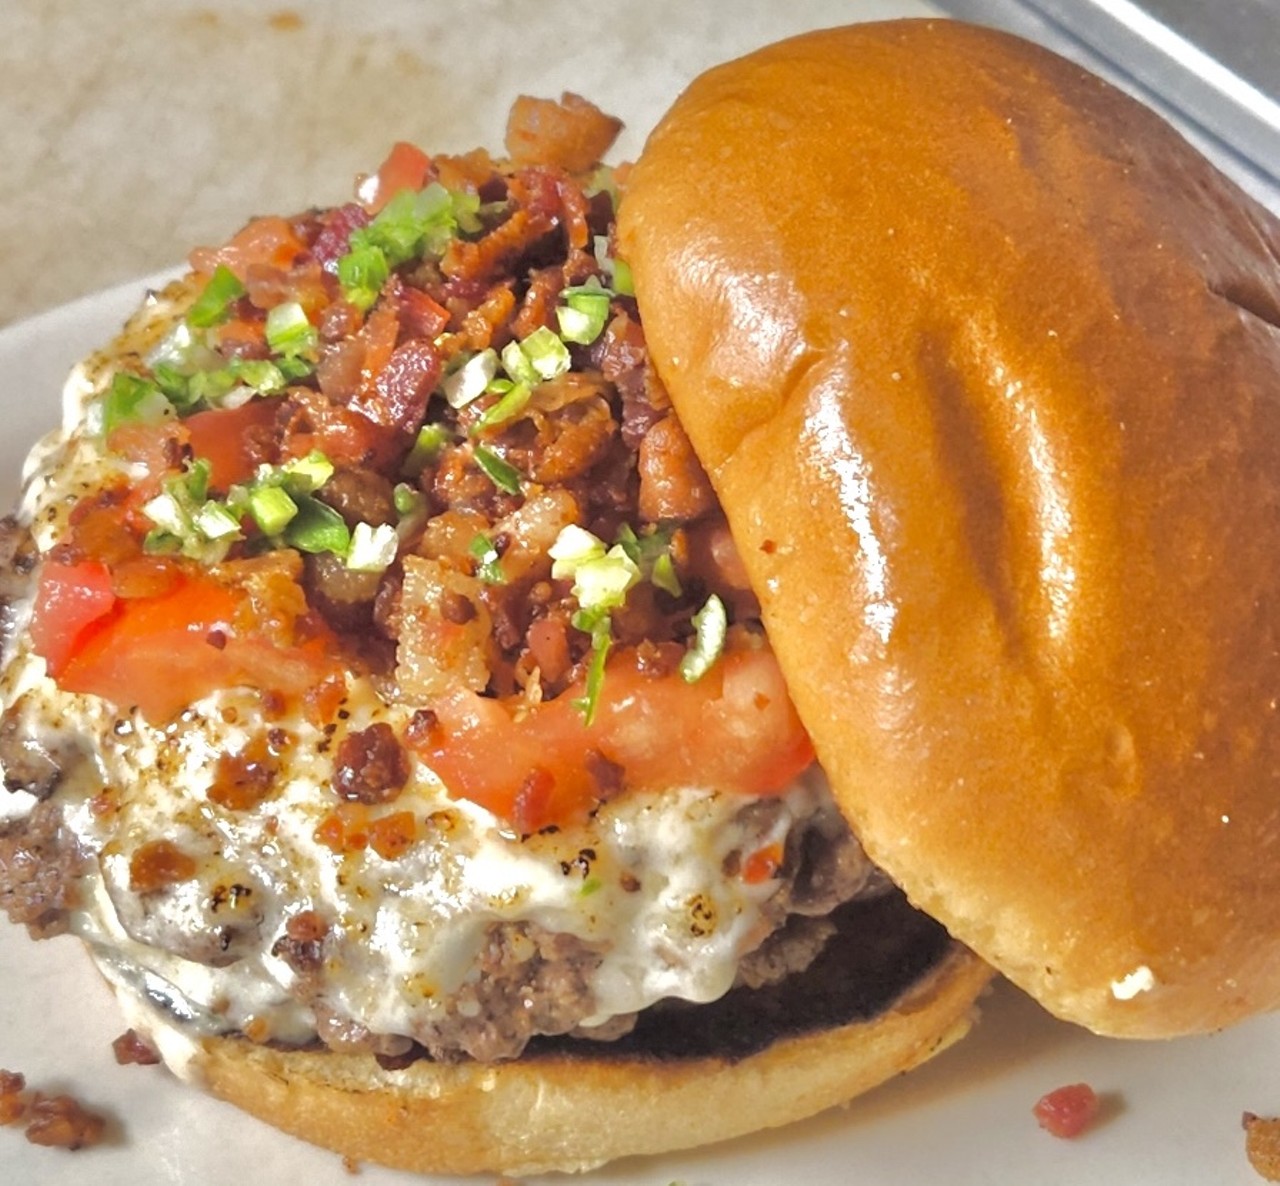 Dundee Tavern
KY Hot Brown Burger
Two beef angus patties with sharp cheddar cheese smashed and drizzled with scratch-creamy mornay sauce, topped with fresh diced tomatoes and bacon bits served on a brioche bun.